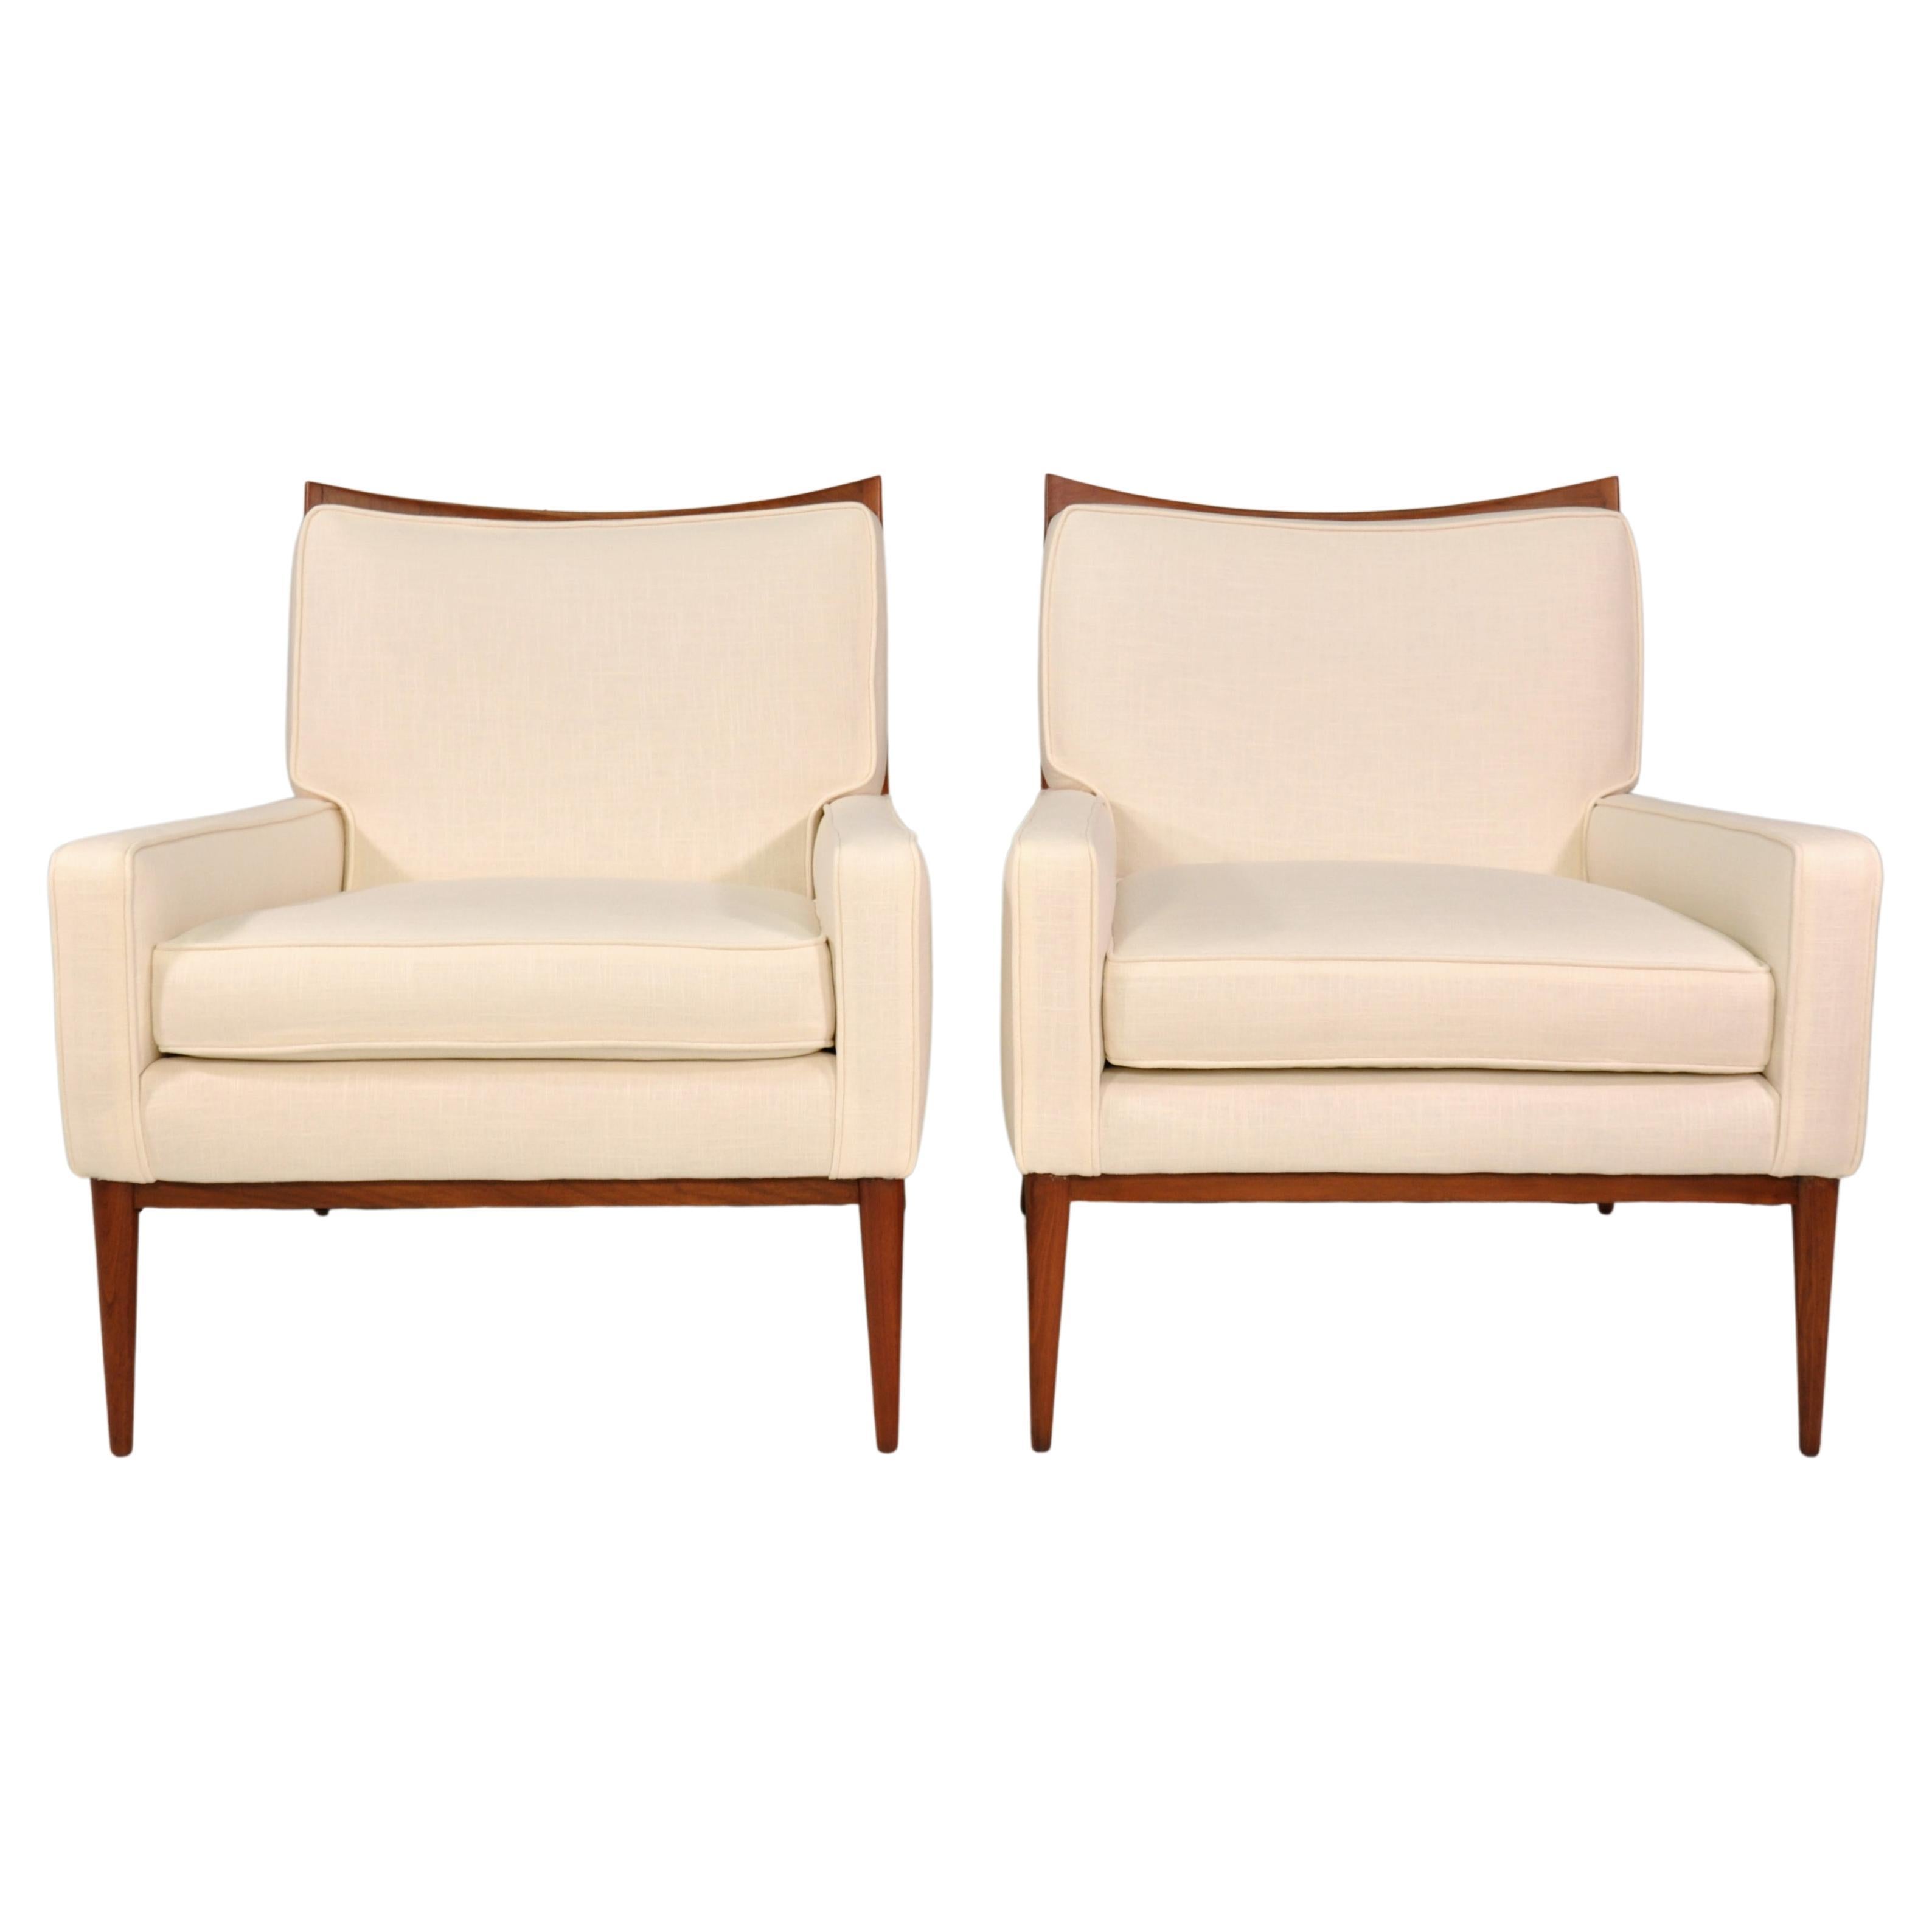 Mid-20th Century Paul McCobb White Linen Lounge Chairs for Directional, 1950s